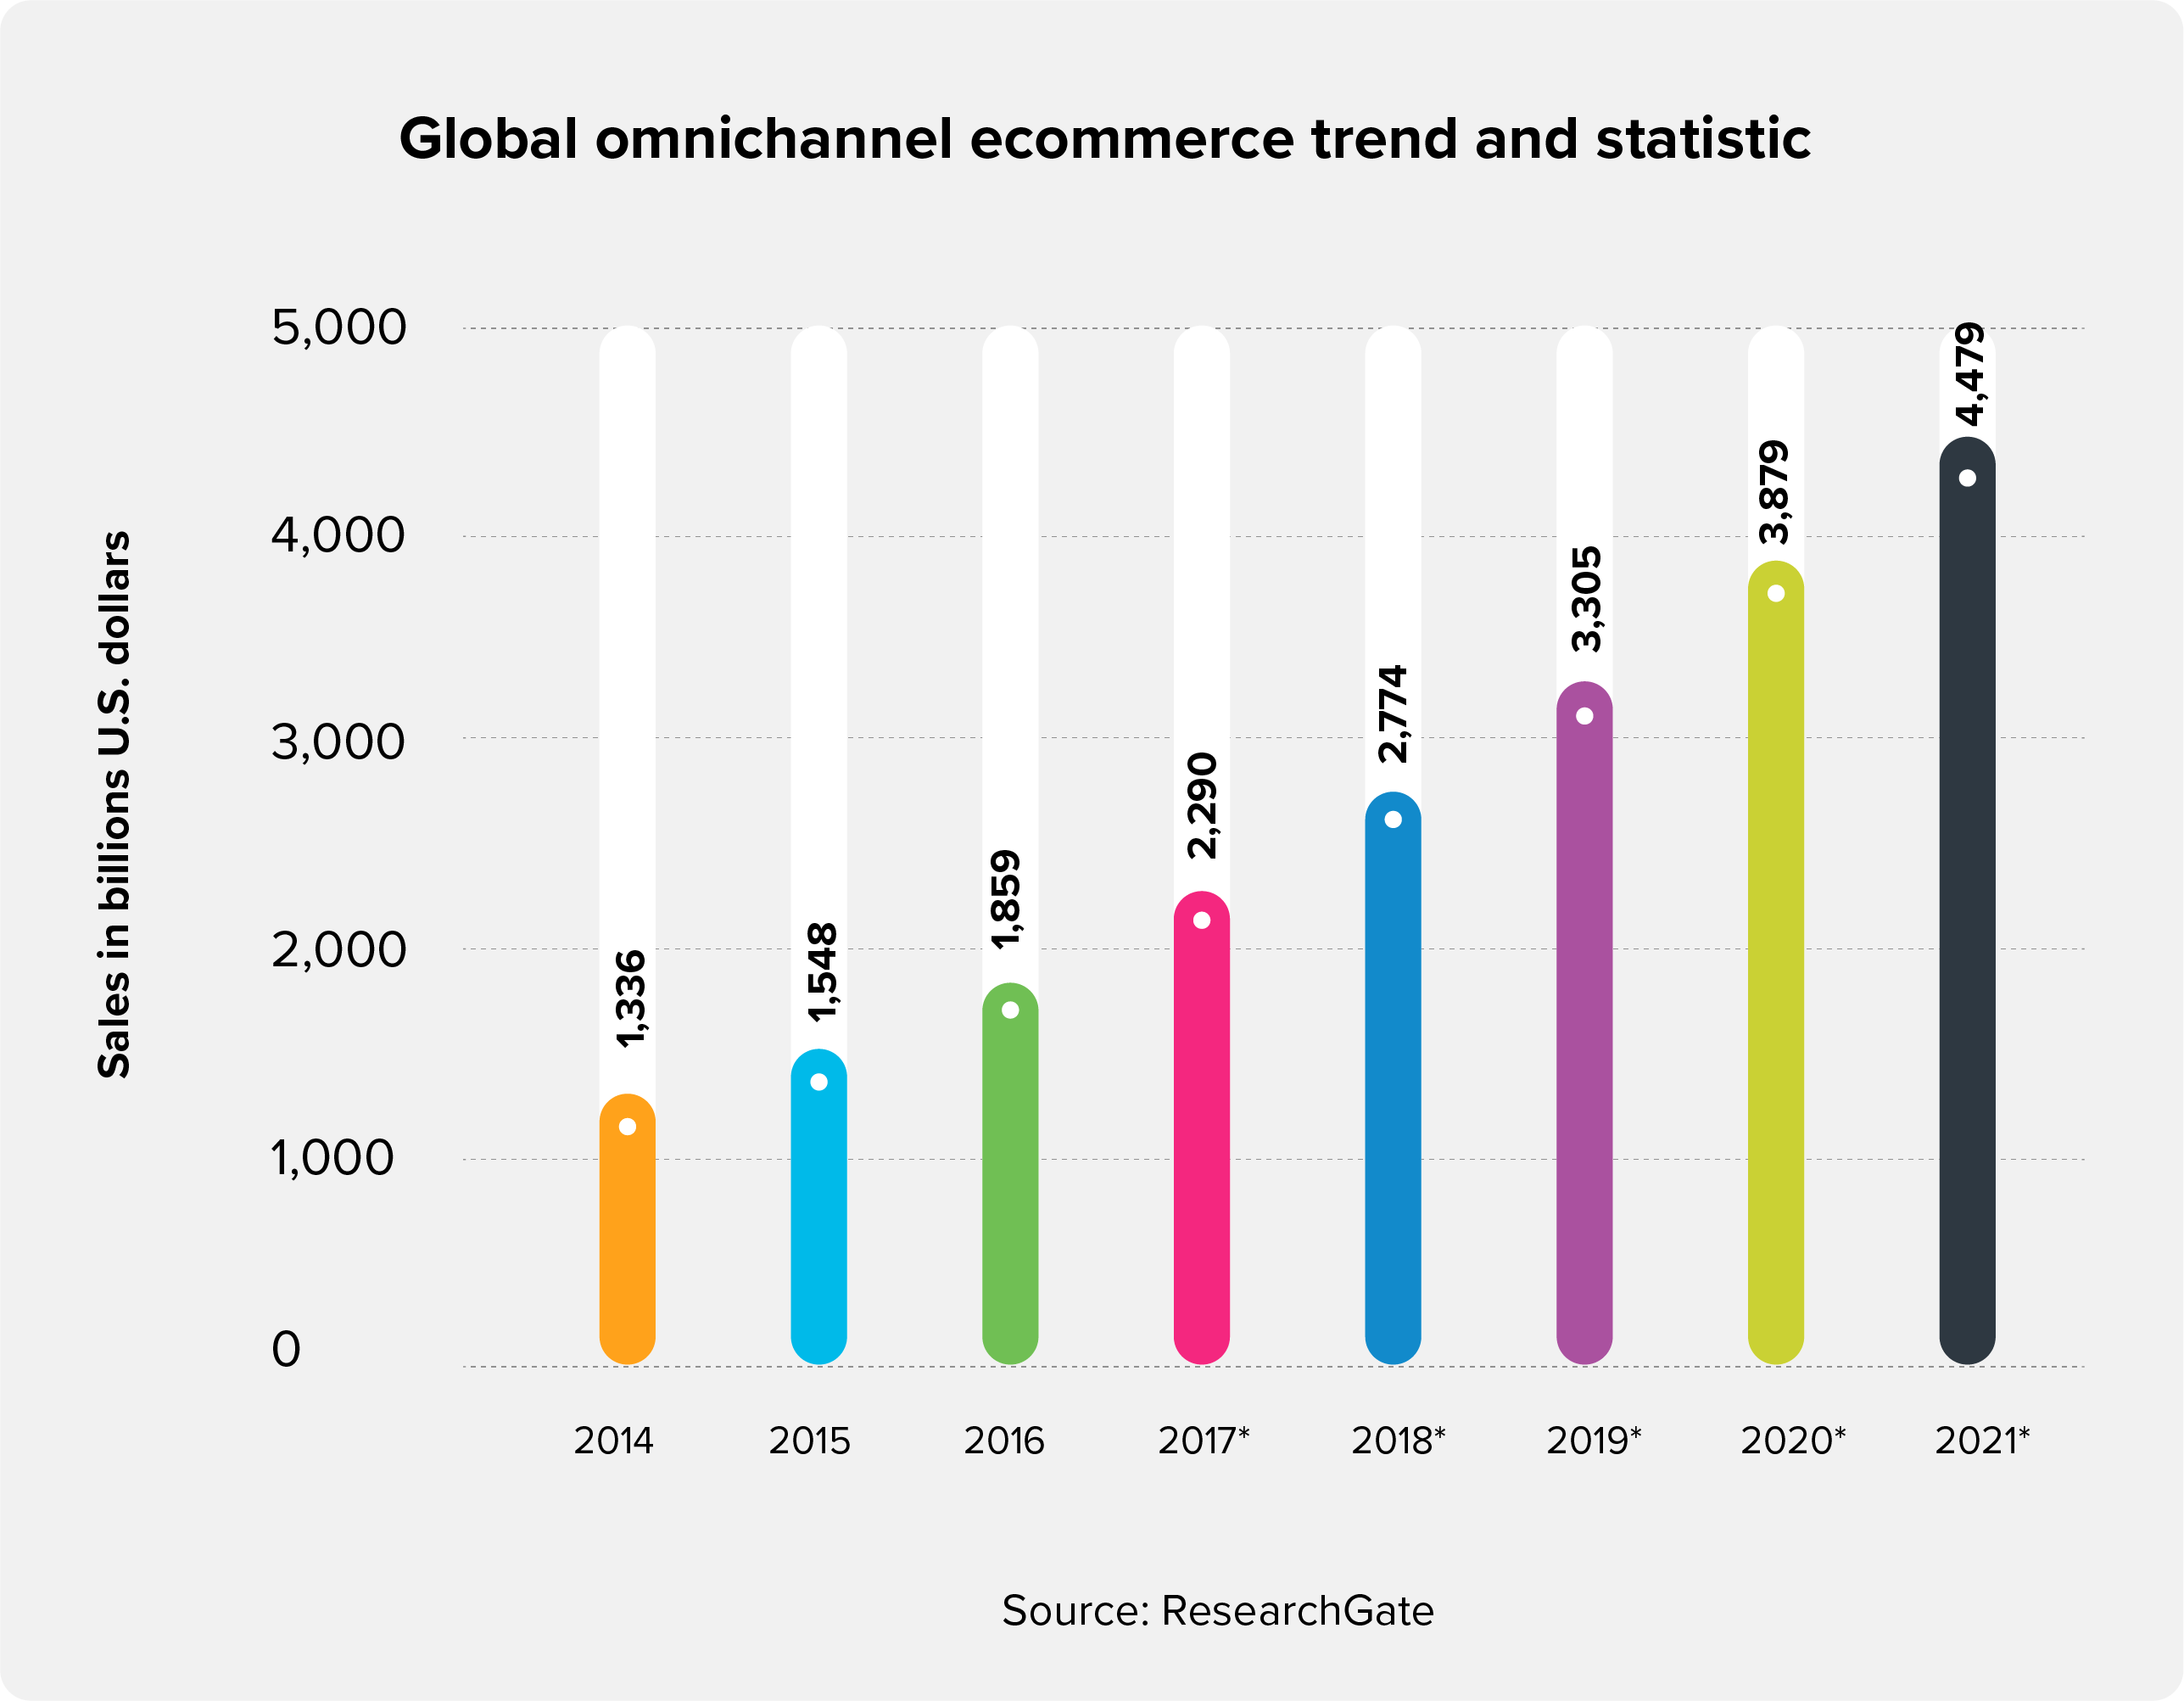 Global omni-channel trend and e-commerce sales in billions US dollars.